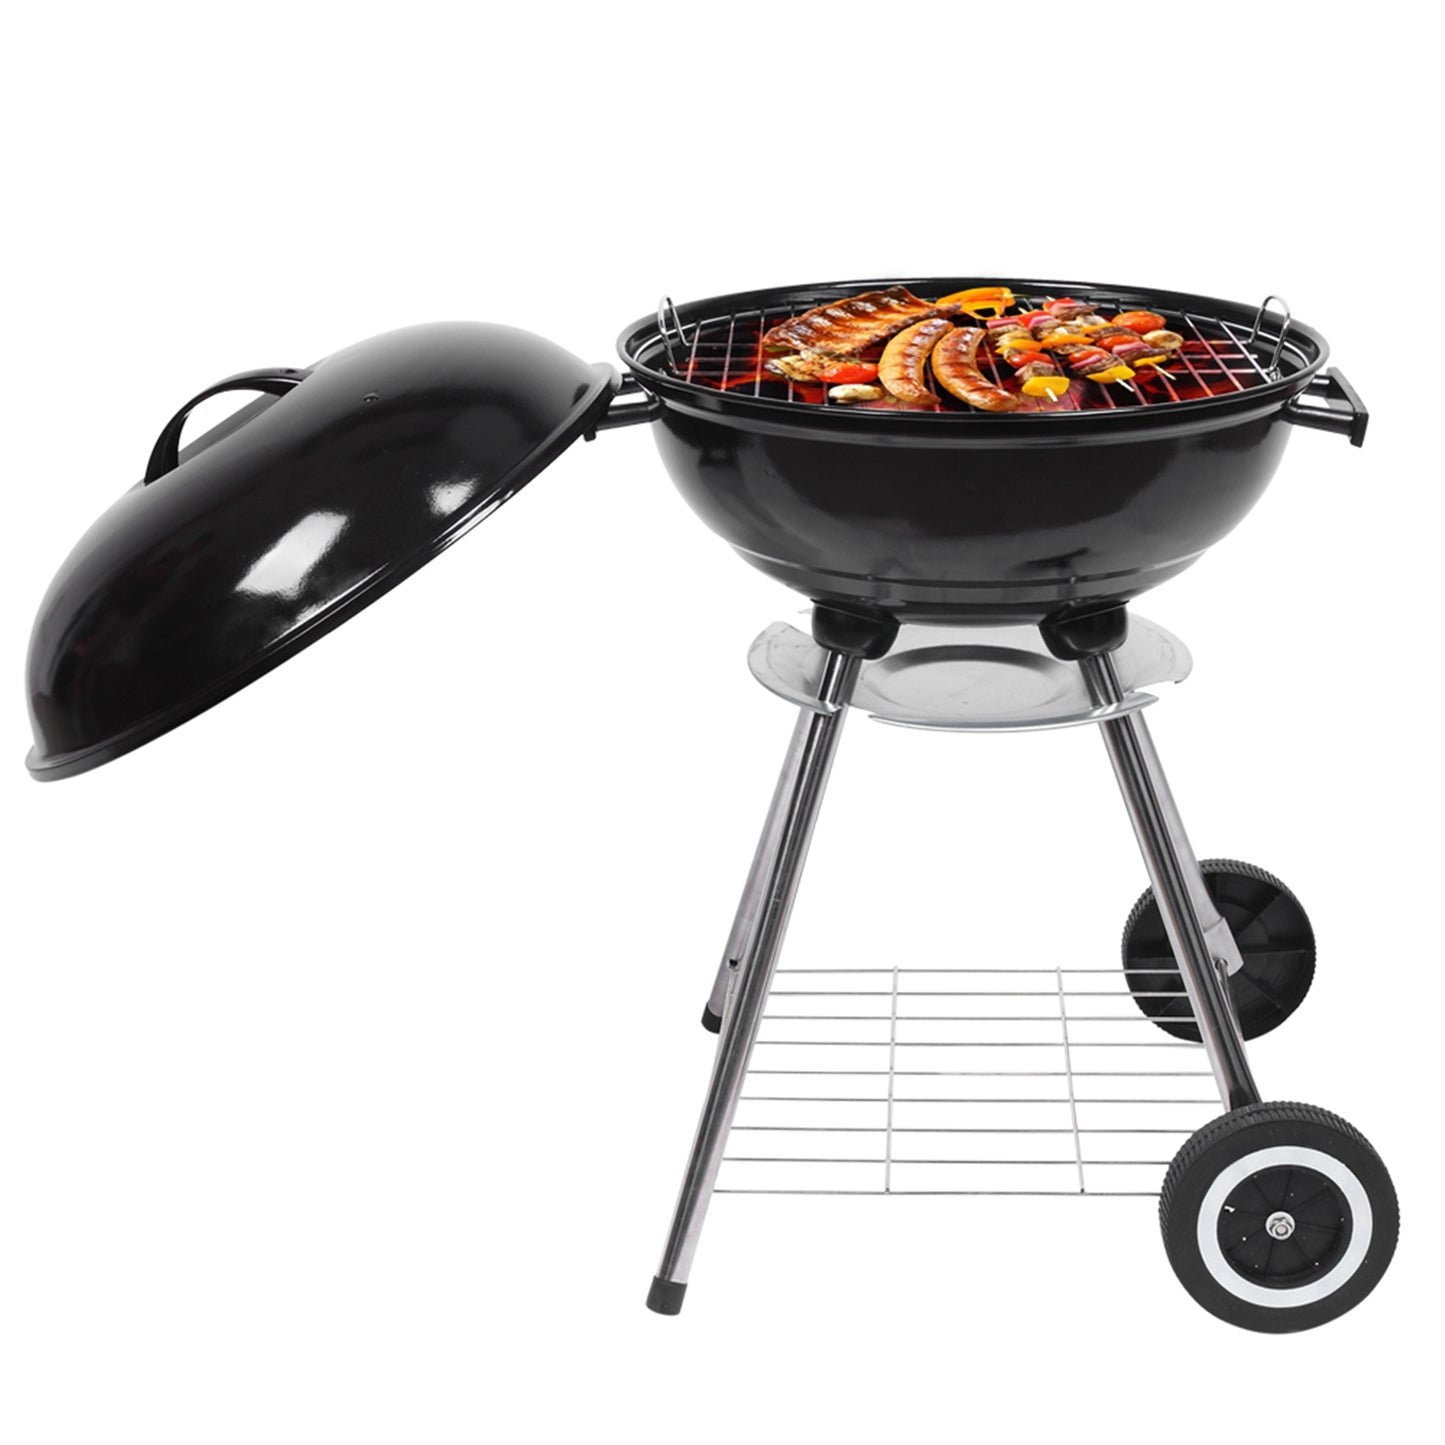 Charcoal Grill, Portable Barbecue Grill w/ Cover & Offset Smoker Combo, High Heat-Resistant BBQ Grill, Outdoor Lightweight Charcoal Grill, for Patio Backyard BBQ Camping Party Picnic, Black, D6452